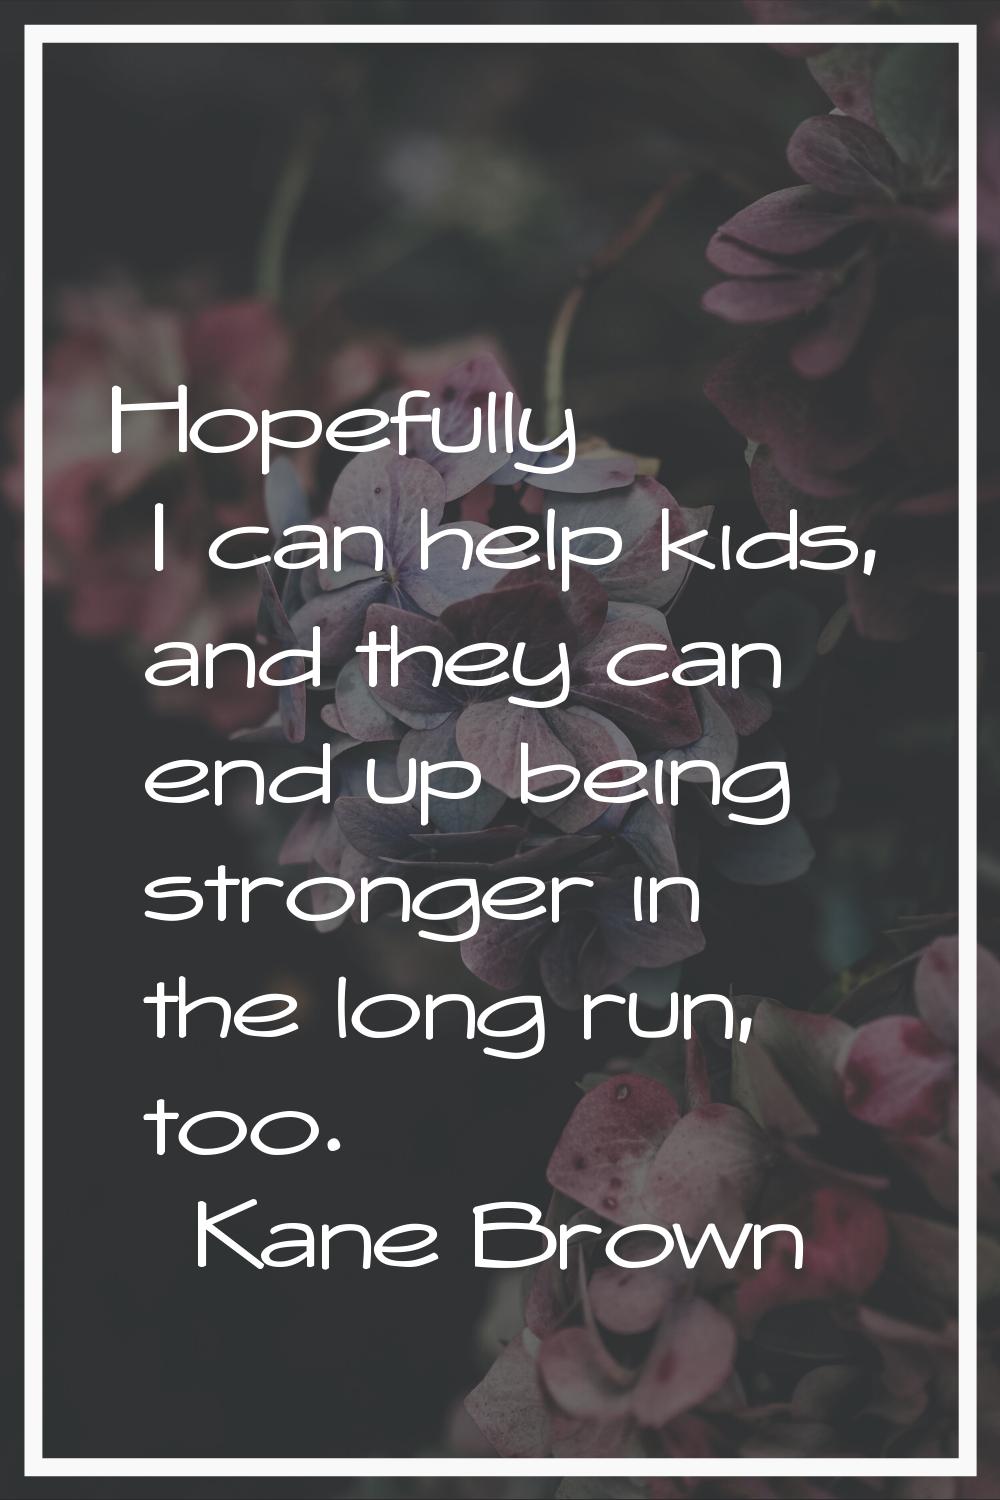 Hopefully I can help kids, and they can end up being stronger in the long run, too.